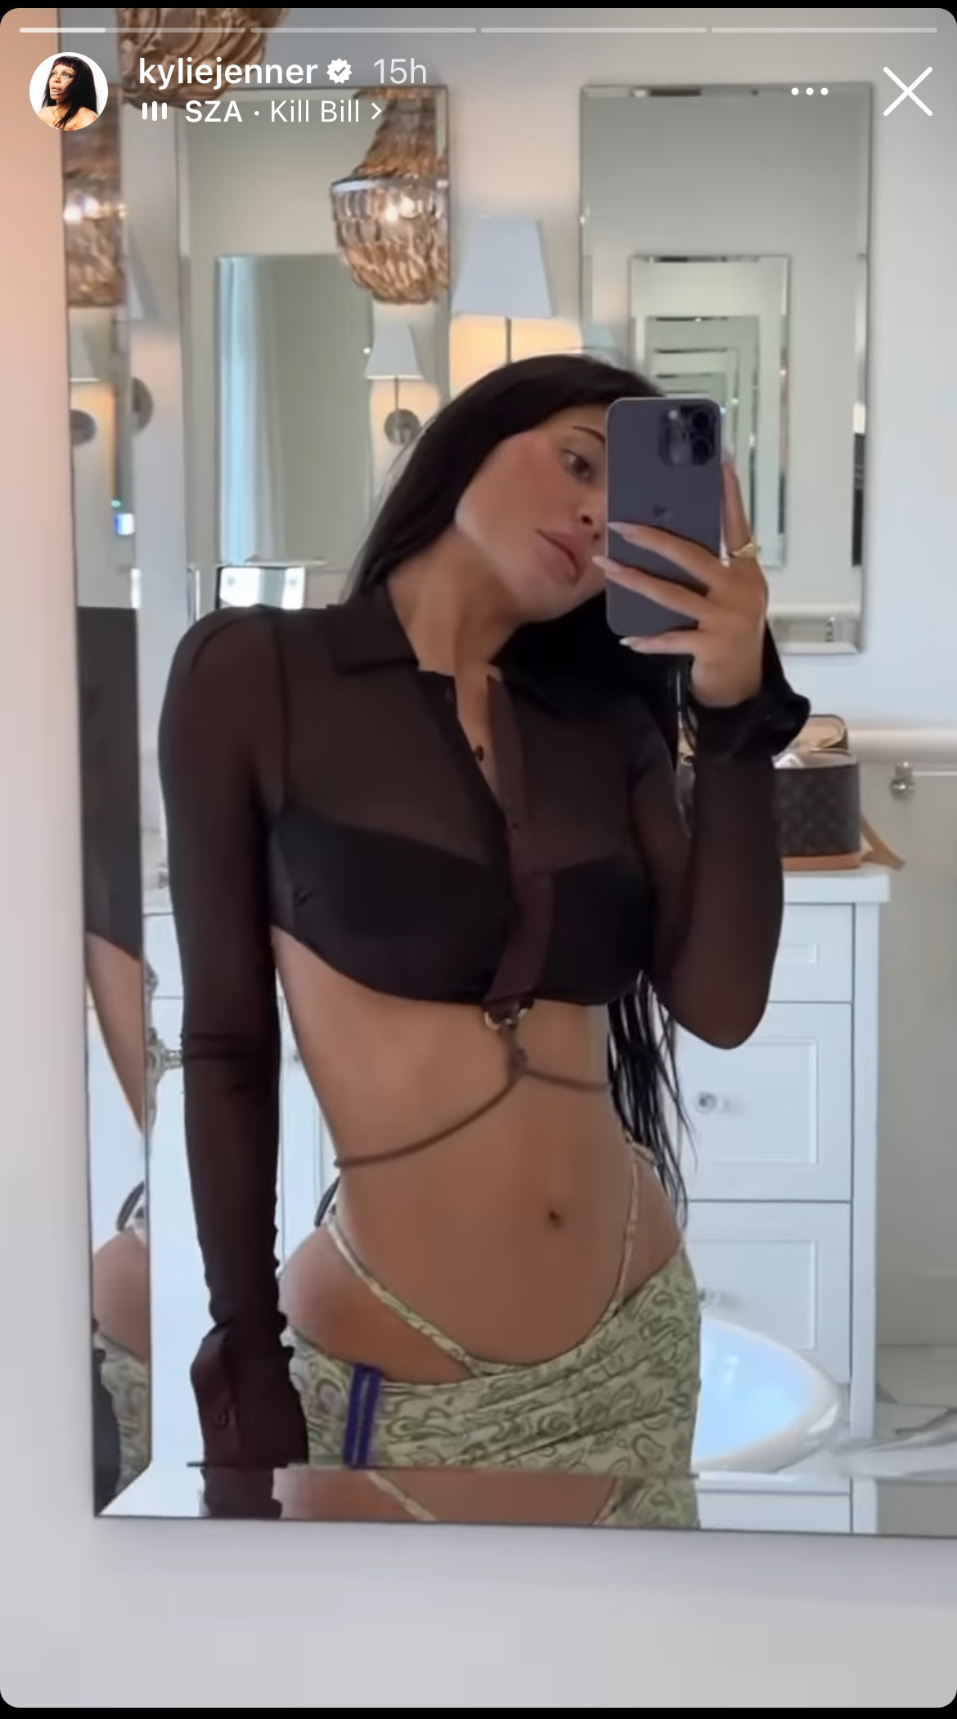 Kylie Jenner resurrects the Y2K exposed thong trend on IG